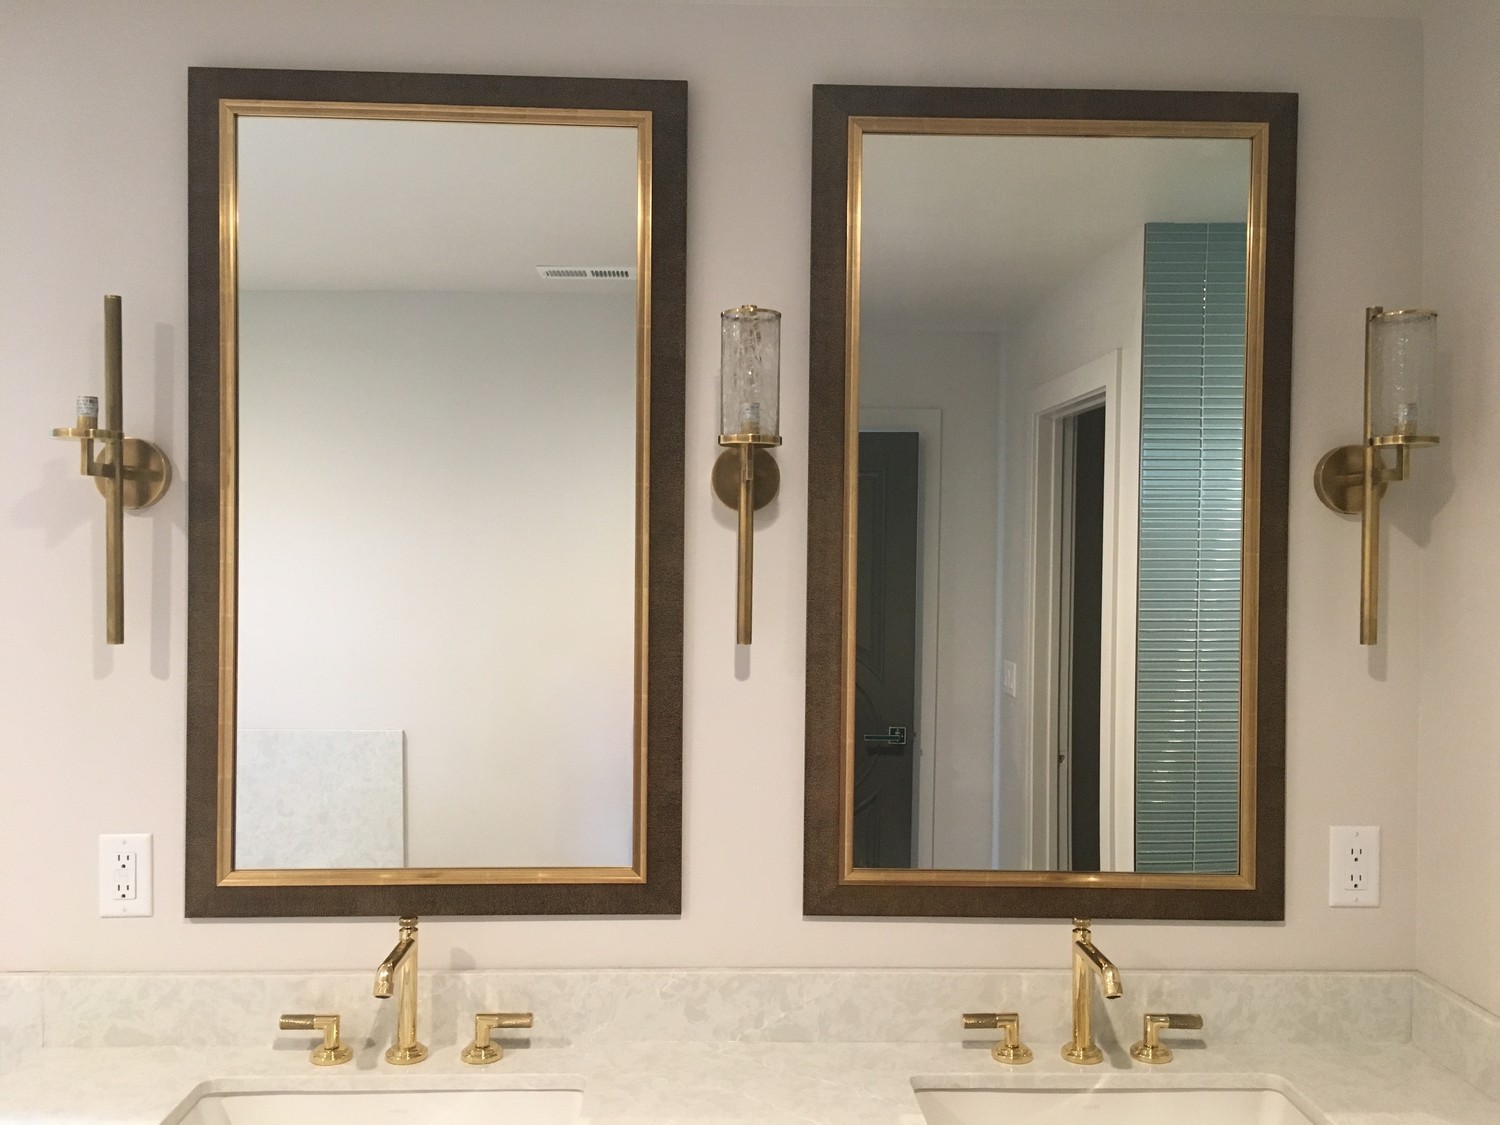 Twin framed mirrors